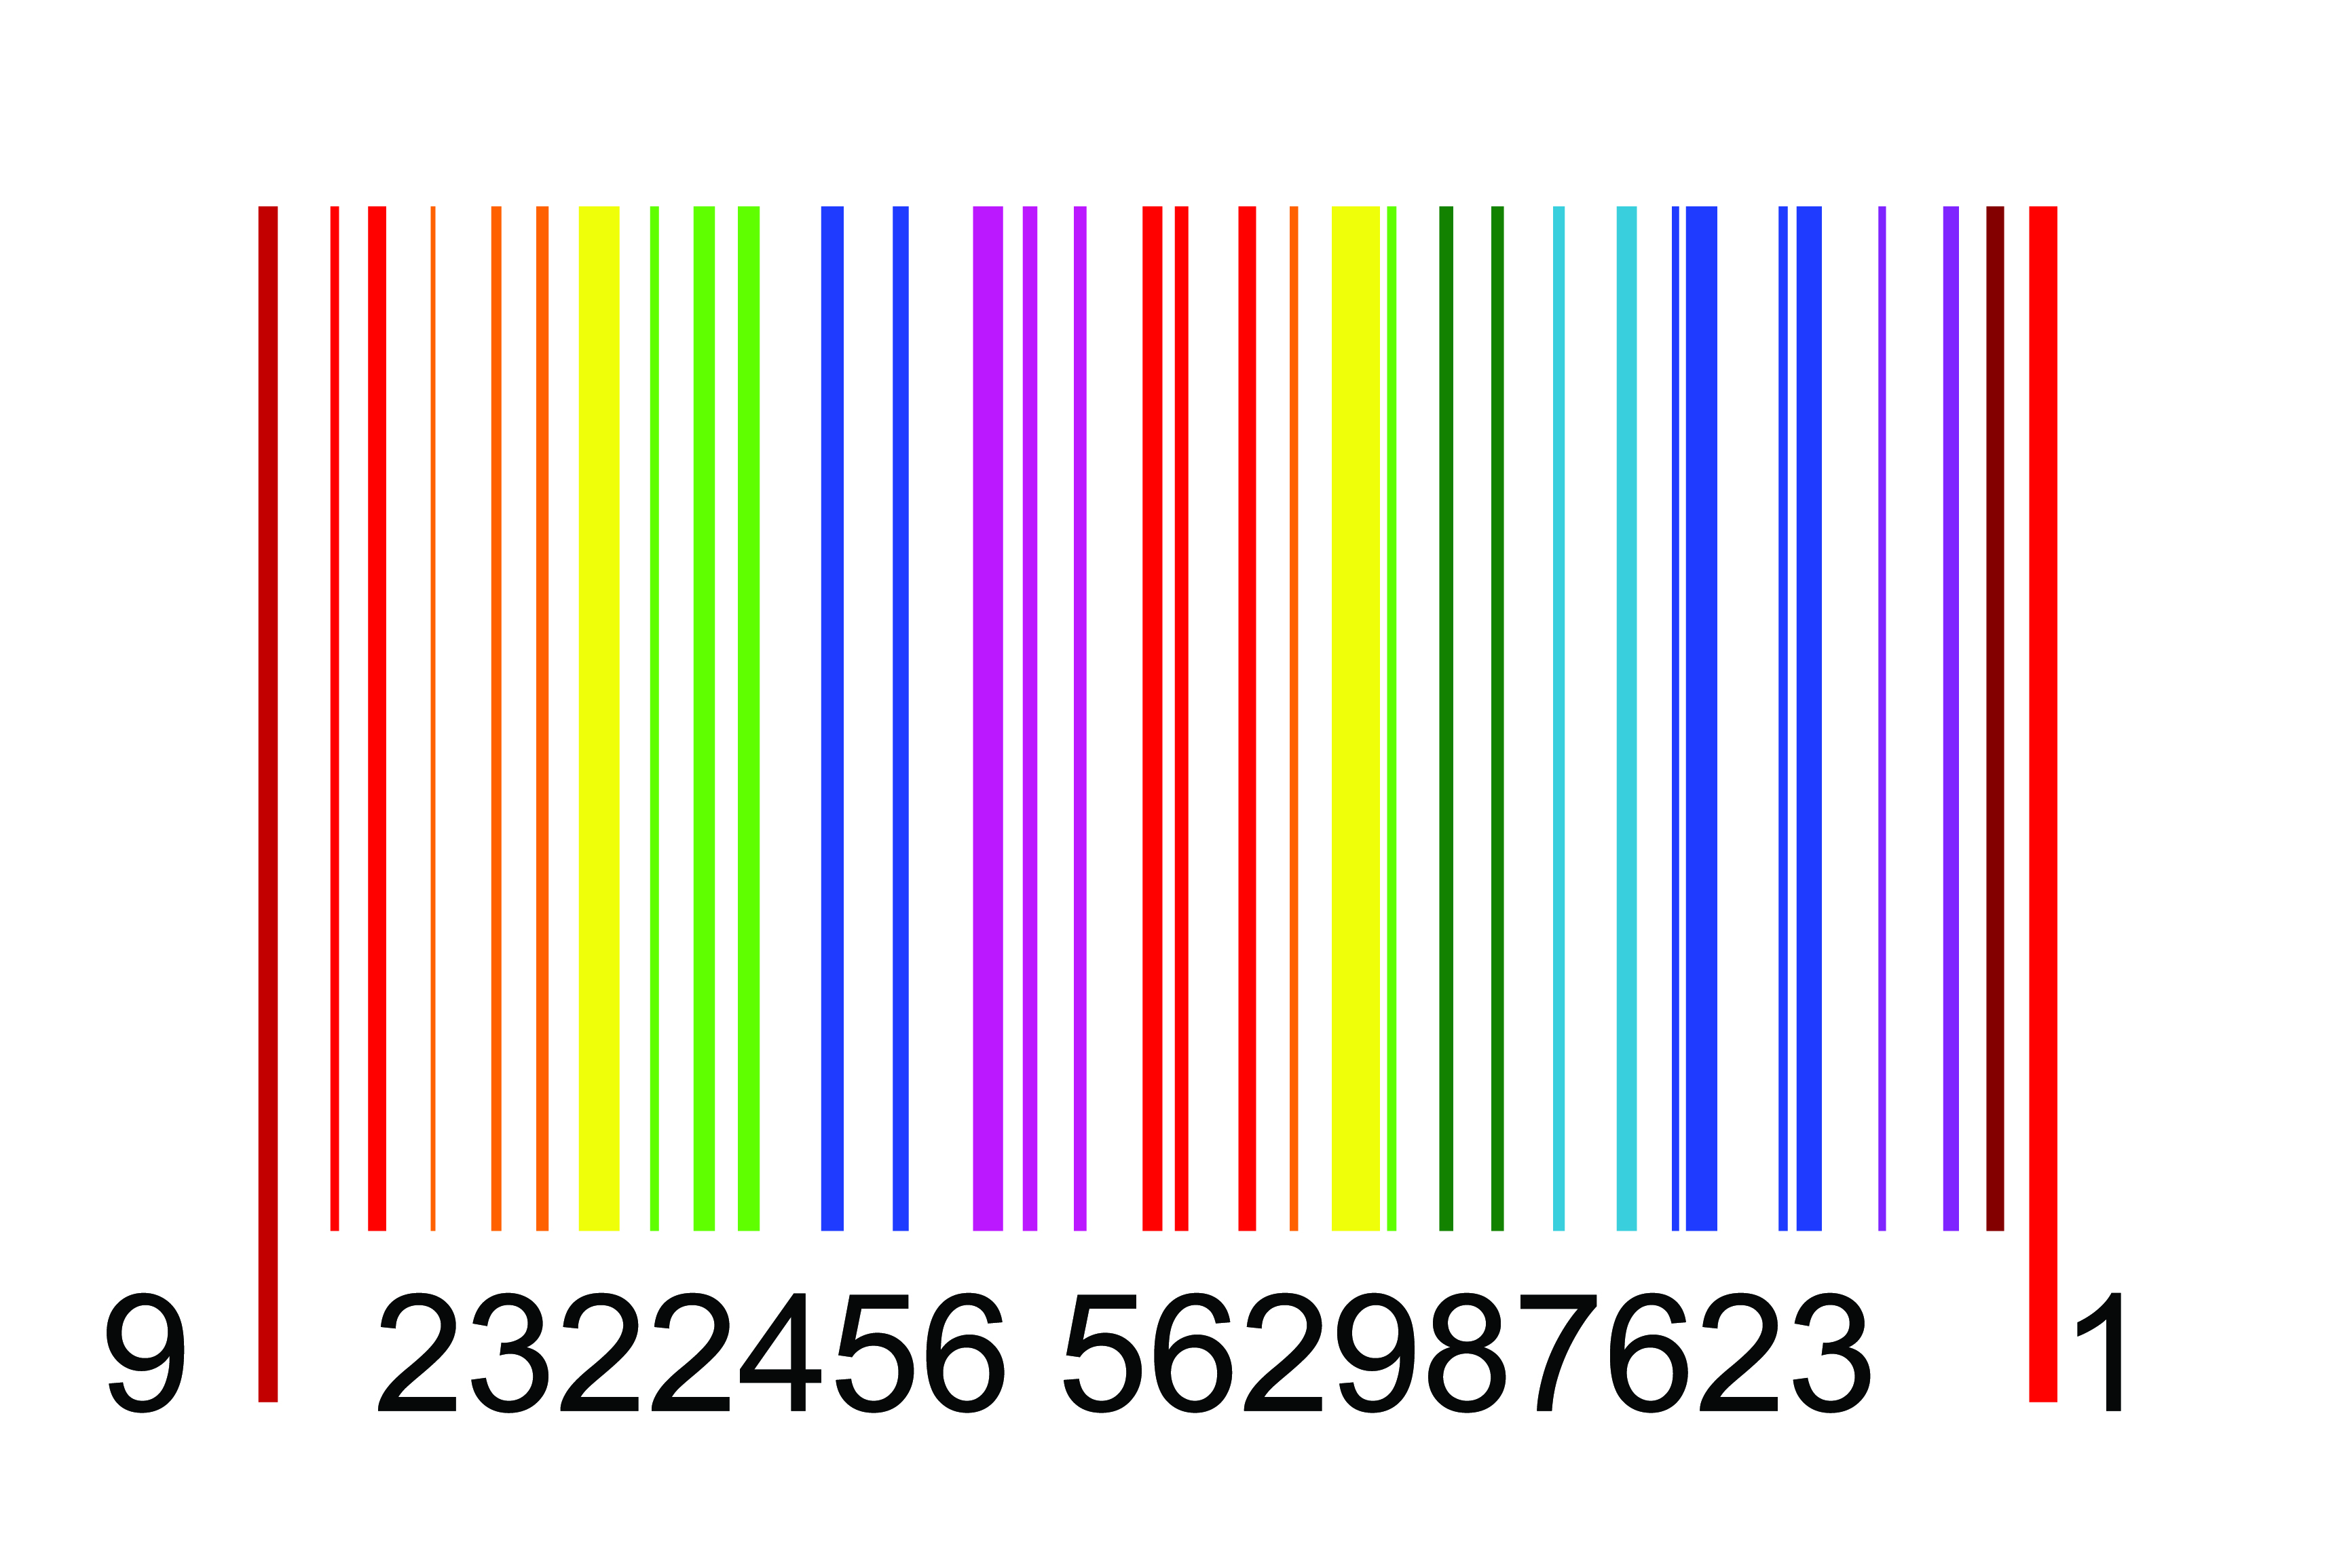 barcode clipart free